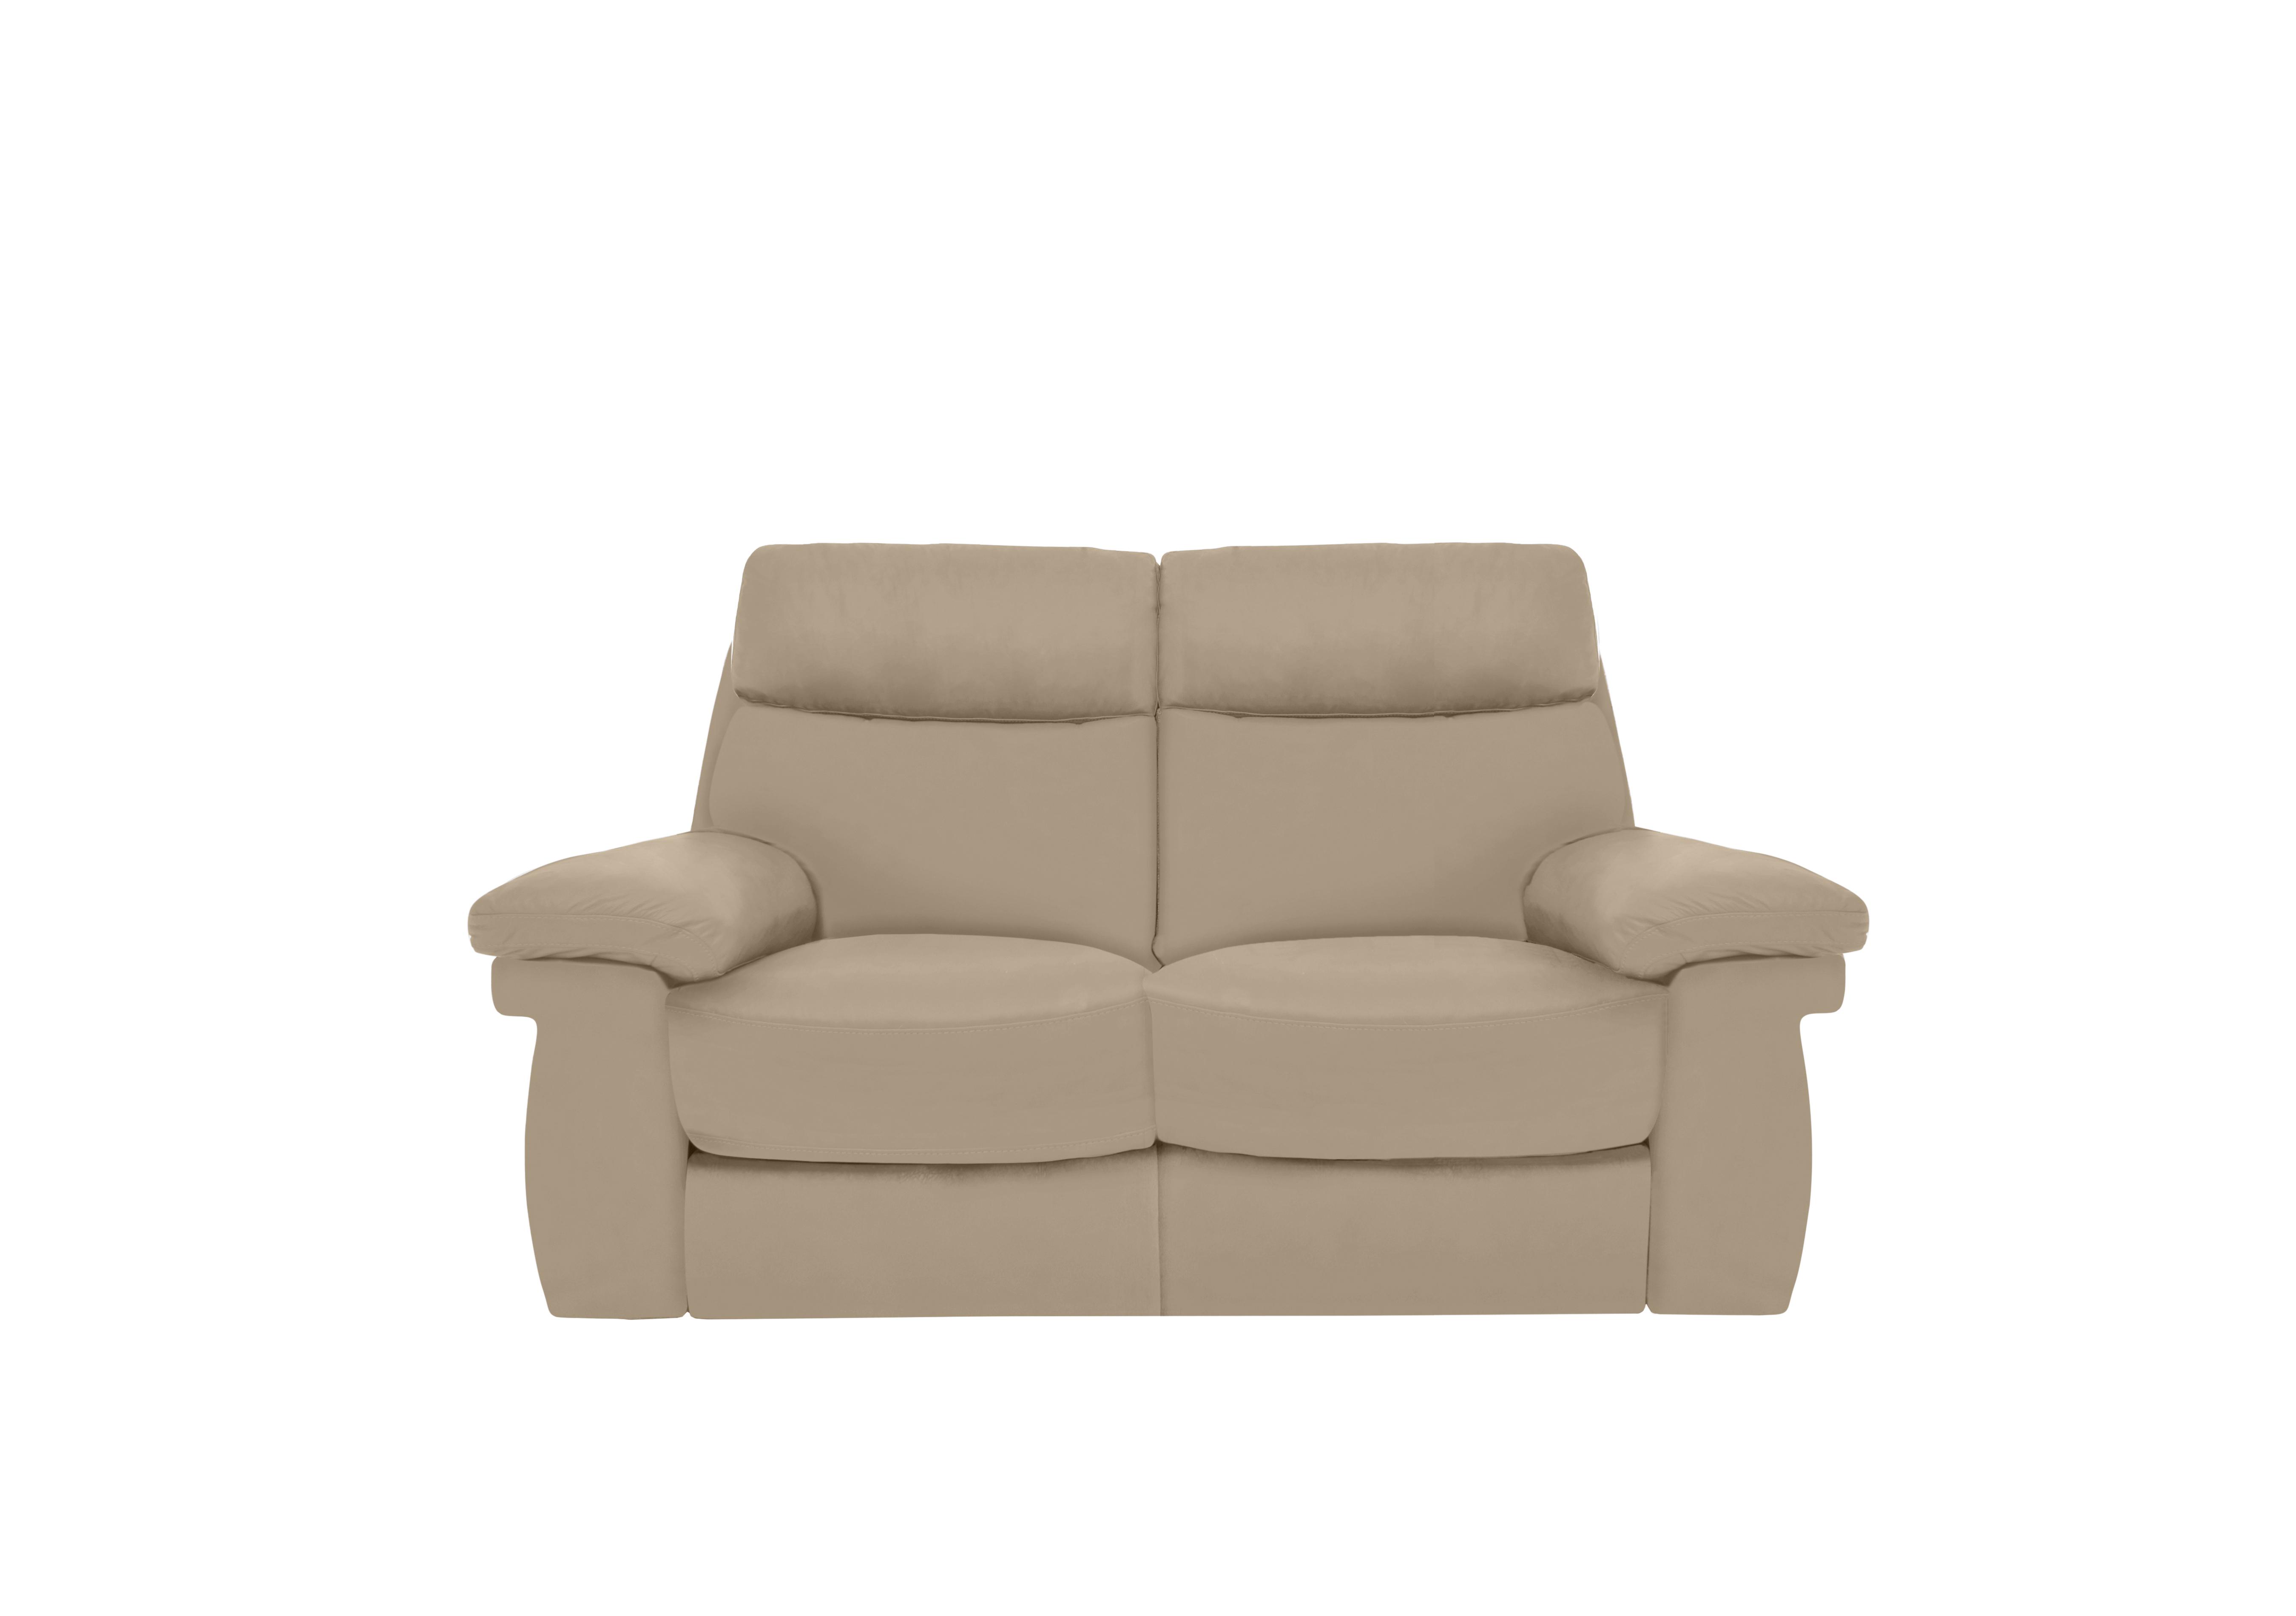 Serene 2 Seater Leather Sofa in Bx-039c Pebble on Furniture Village